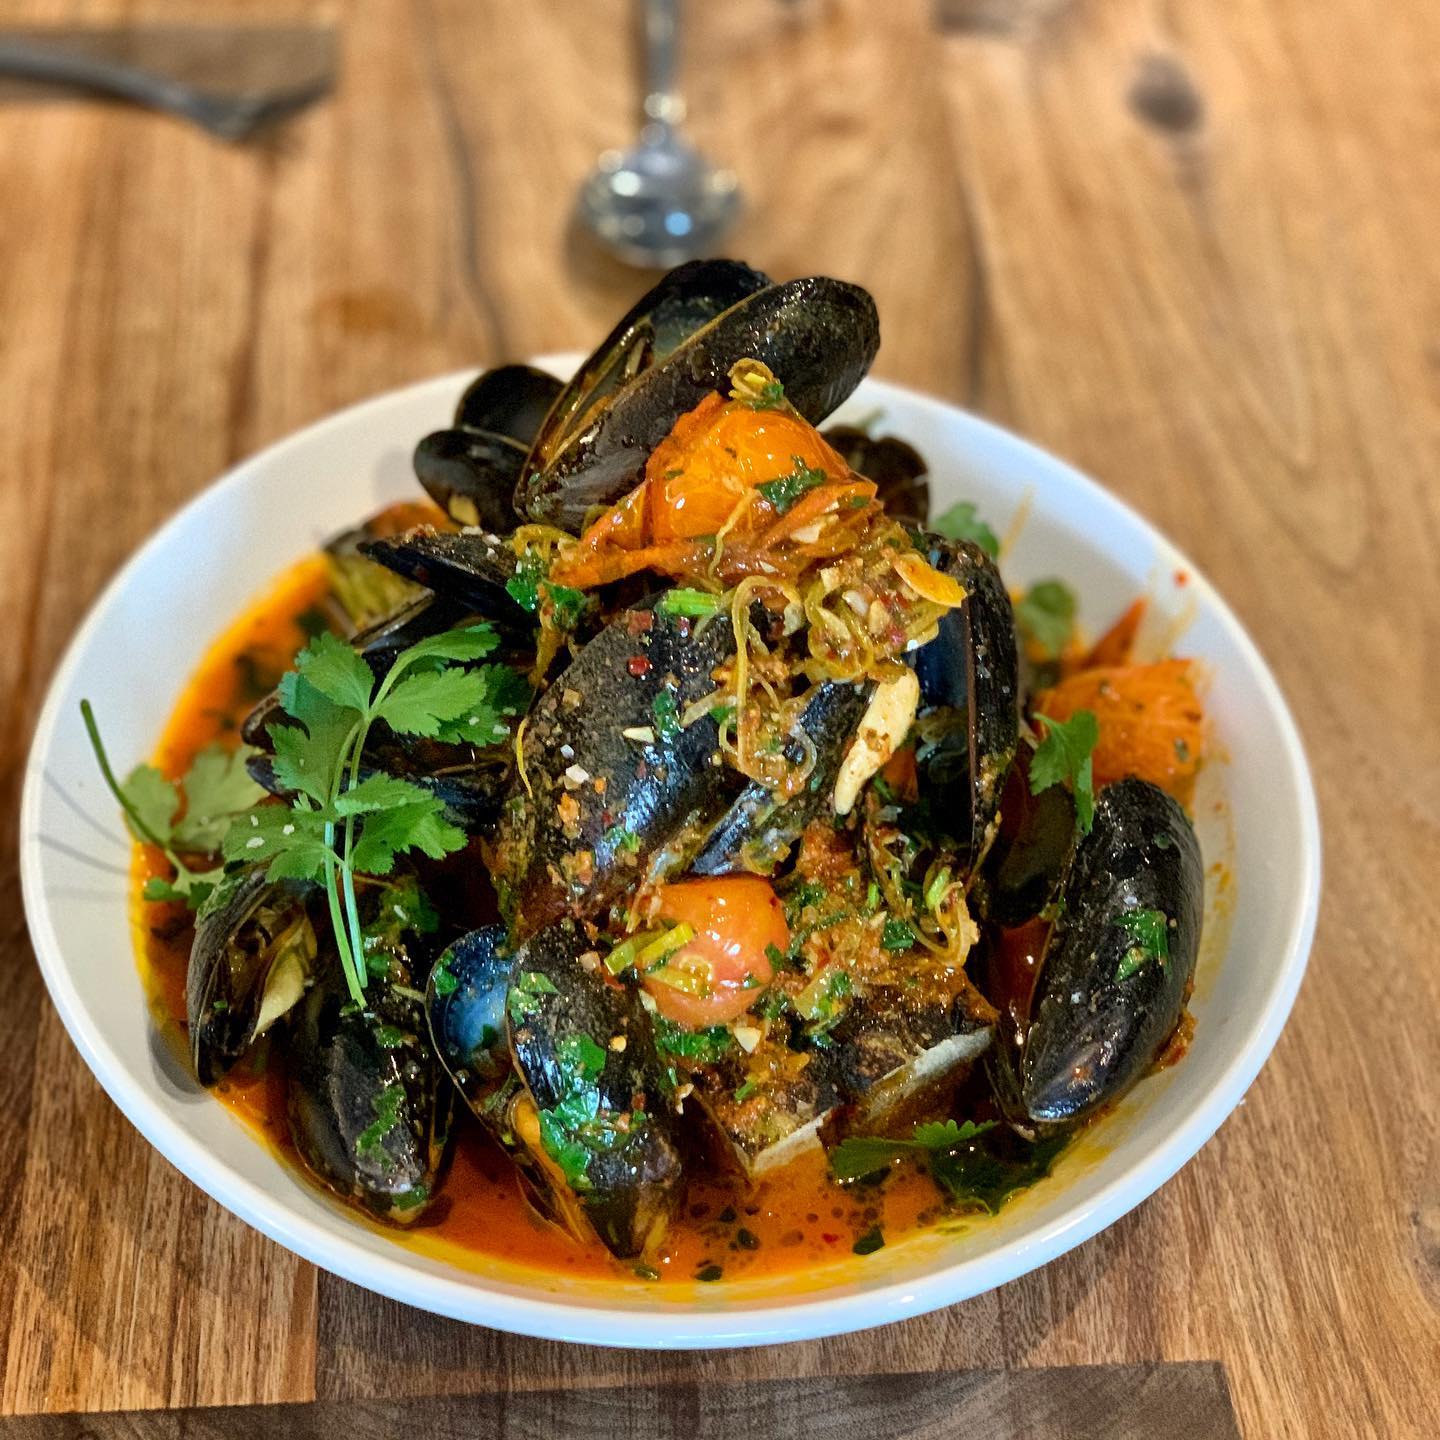 Mussels with nduja, cherry tomatoes, fennel, and garganega